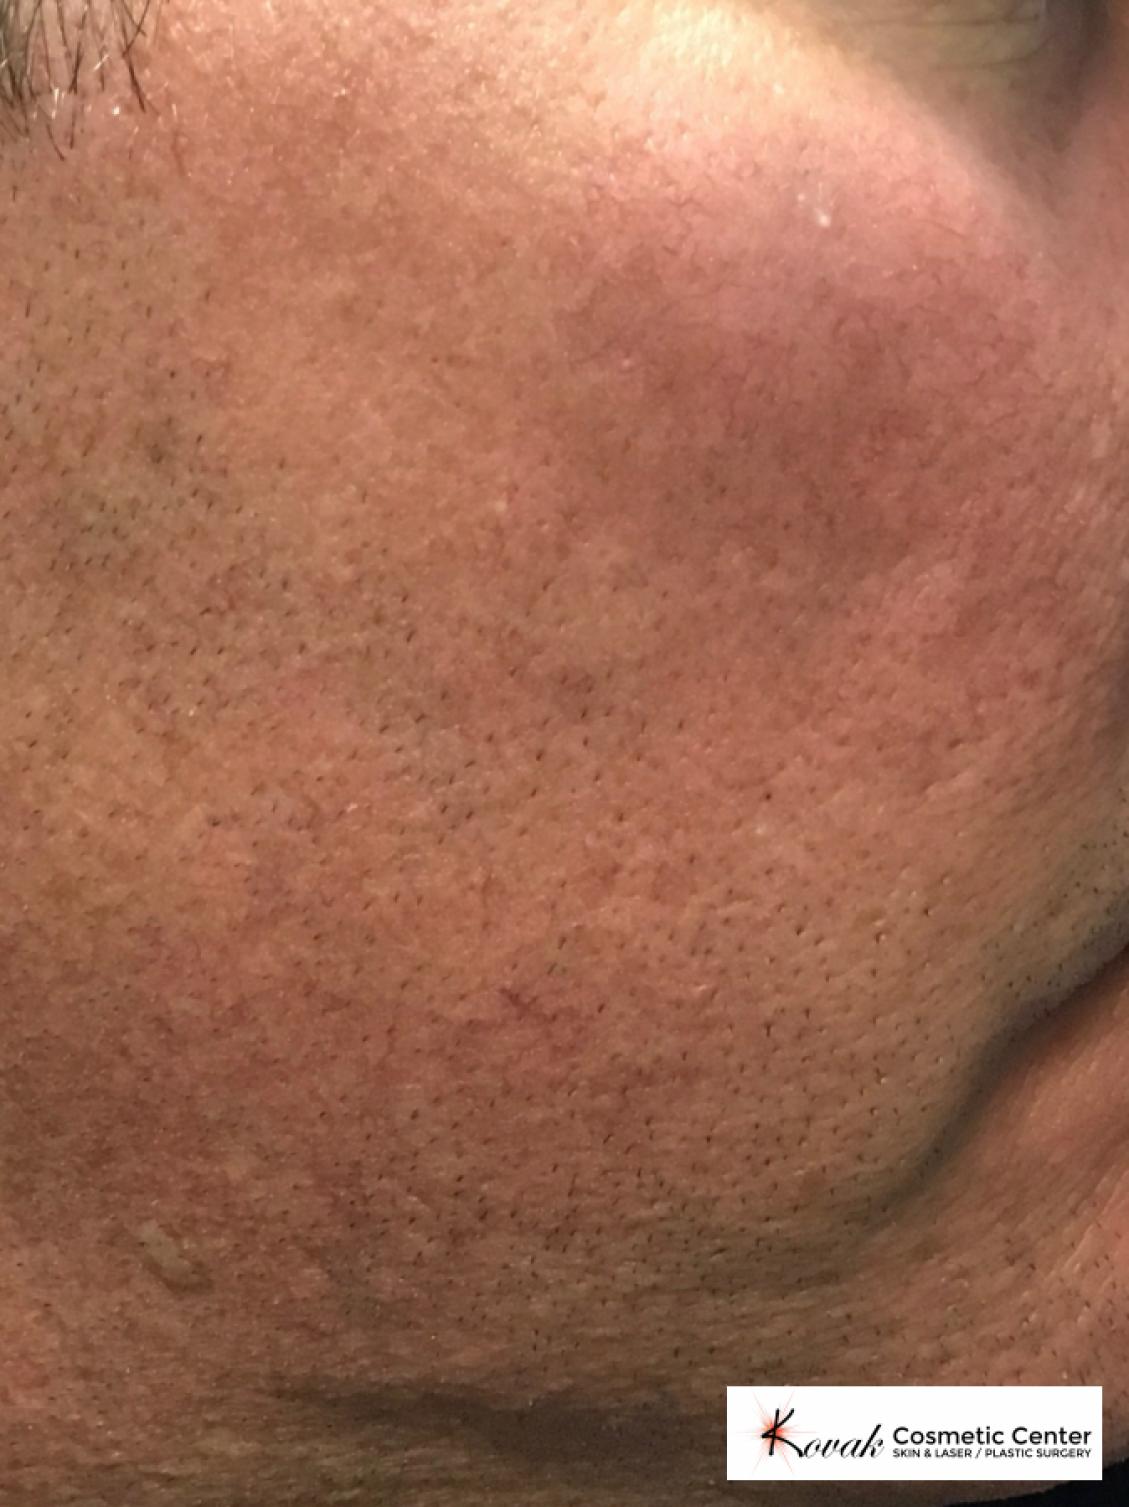 Acne Scars treated with Juvederm on 45 year old male - After  